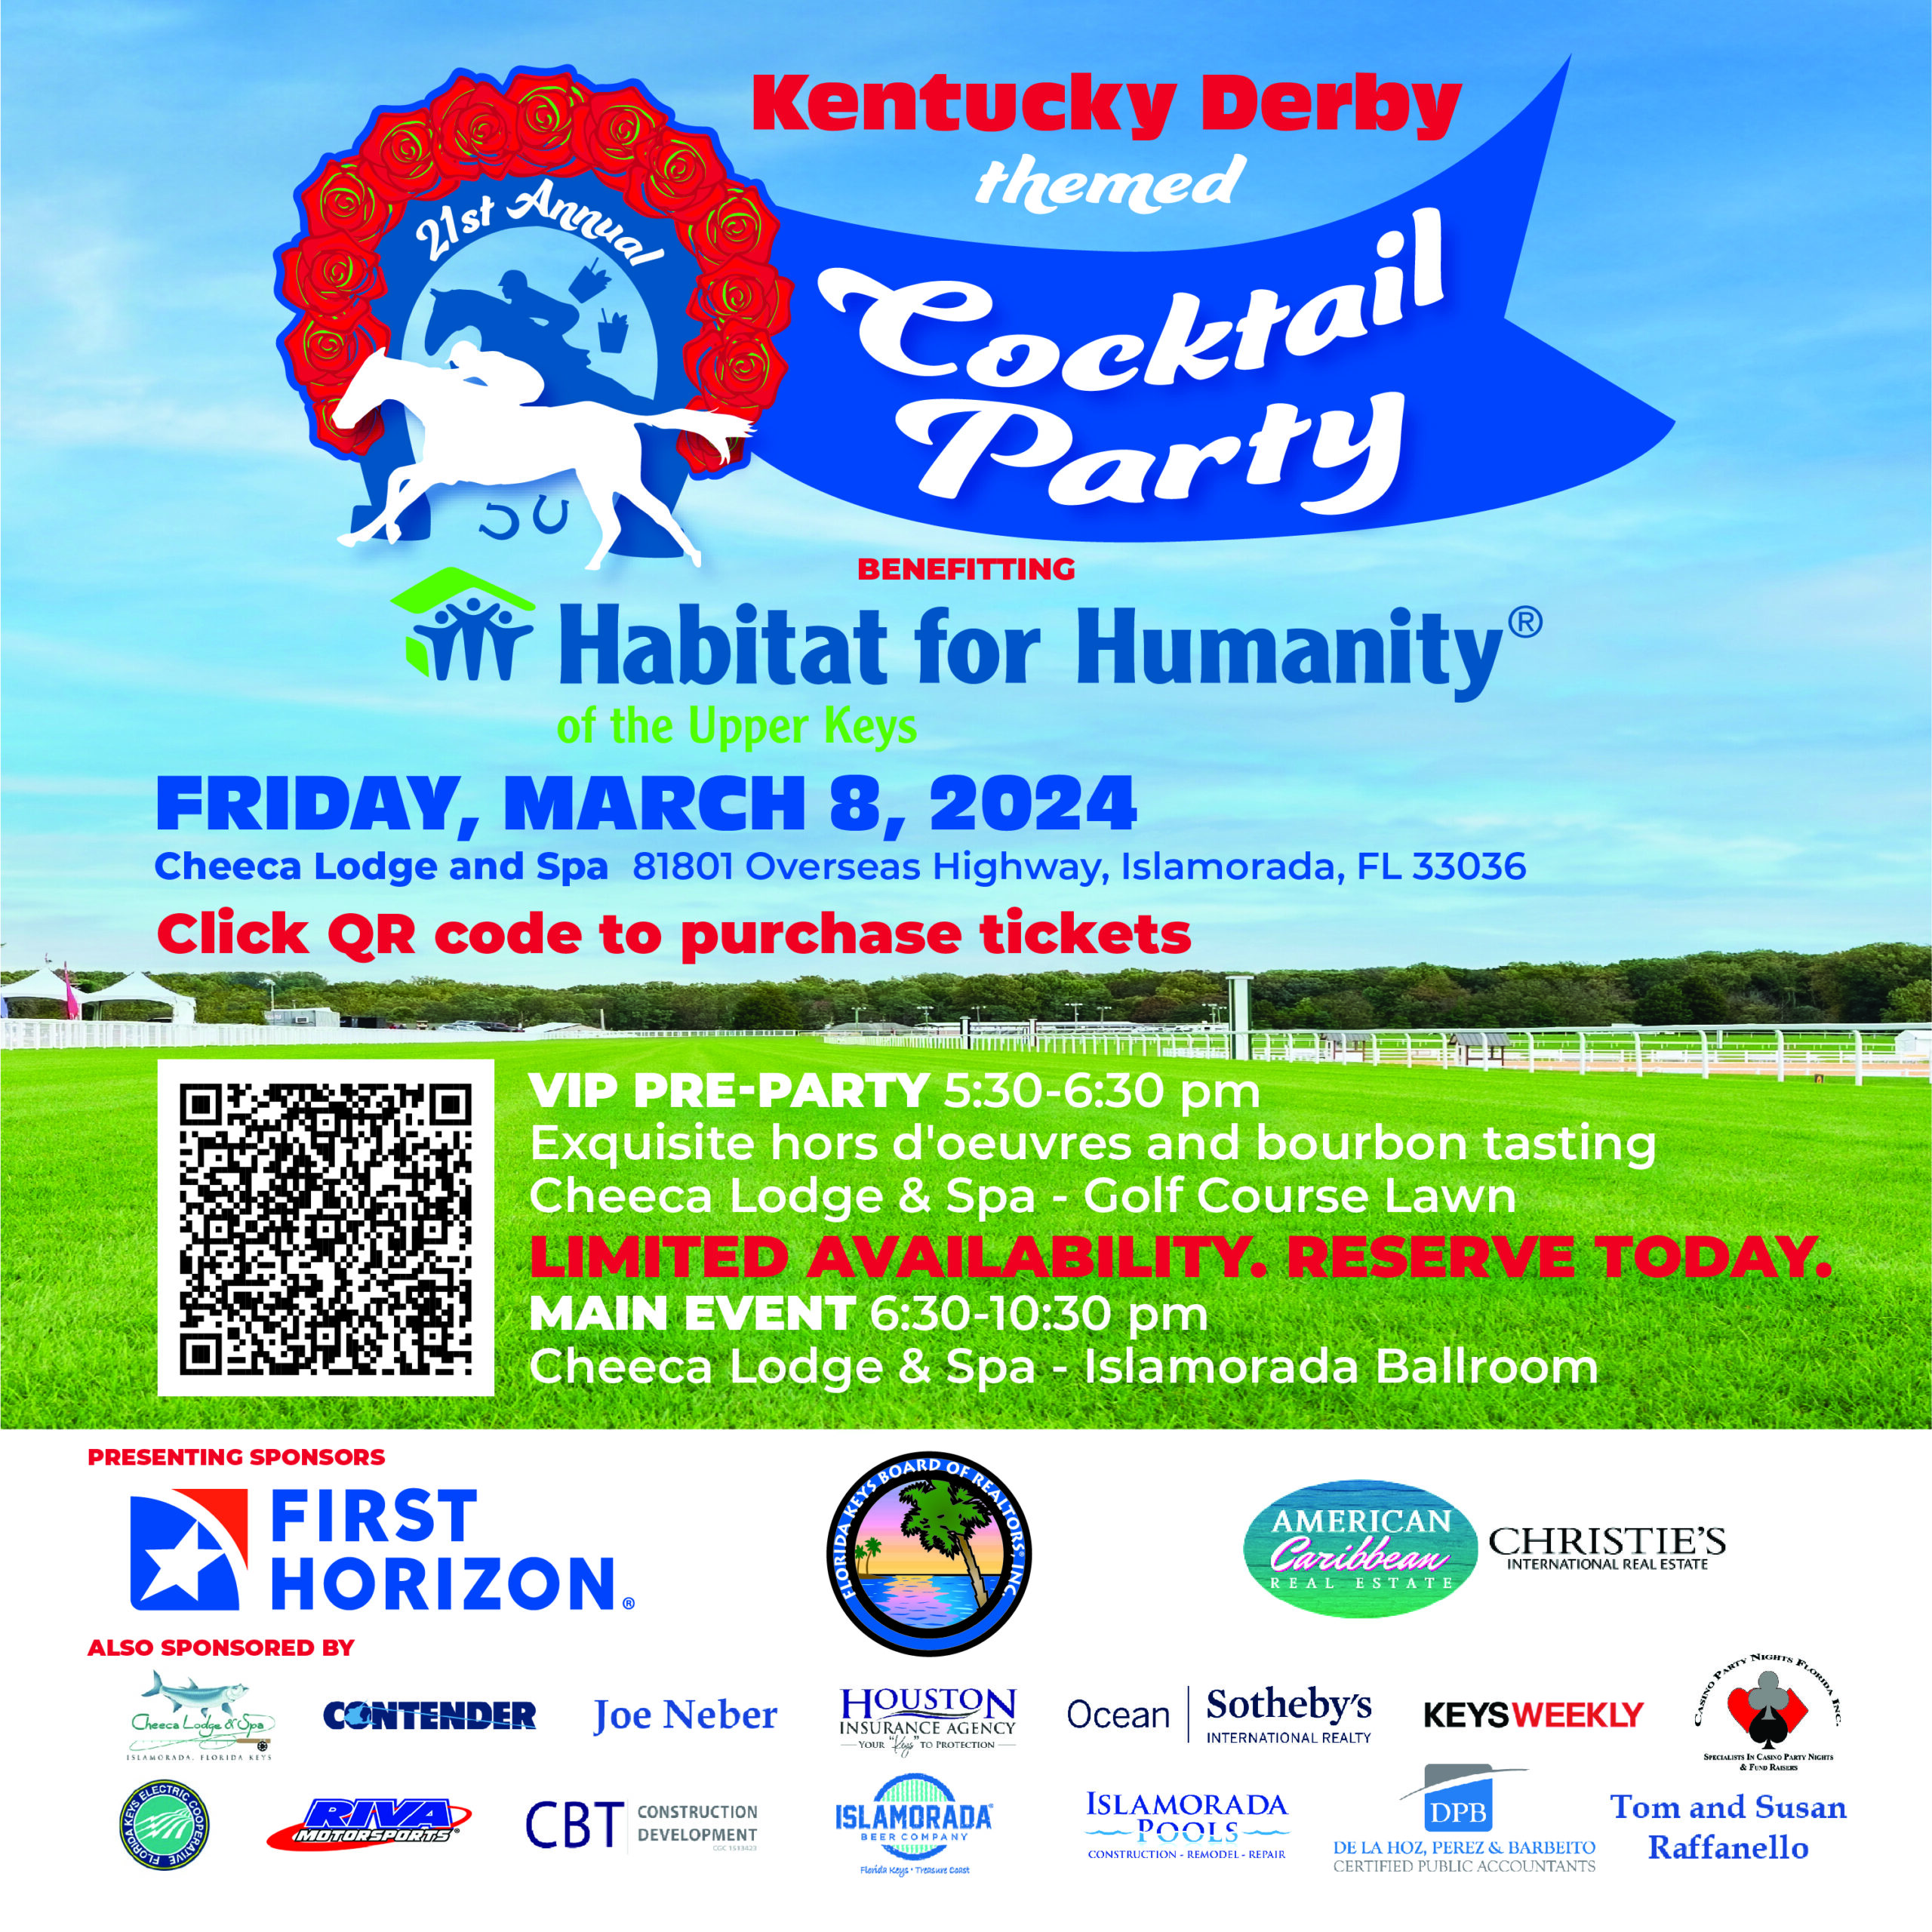 H4H_KENTUCKY_DERBY_COCKTAIL_PARTY_ADS_10x10 H4oFLK (2)